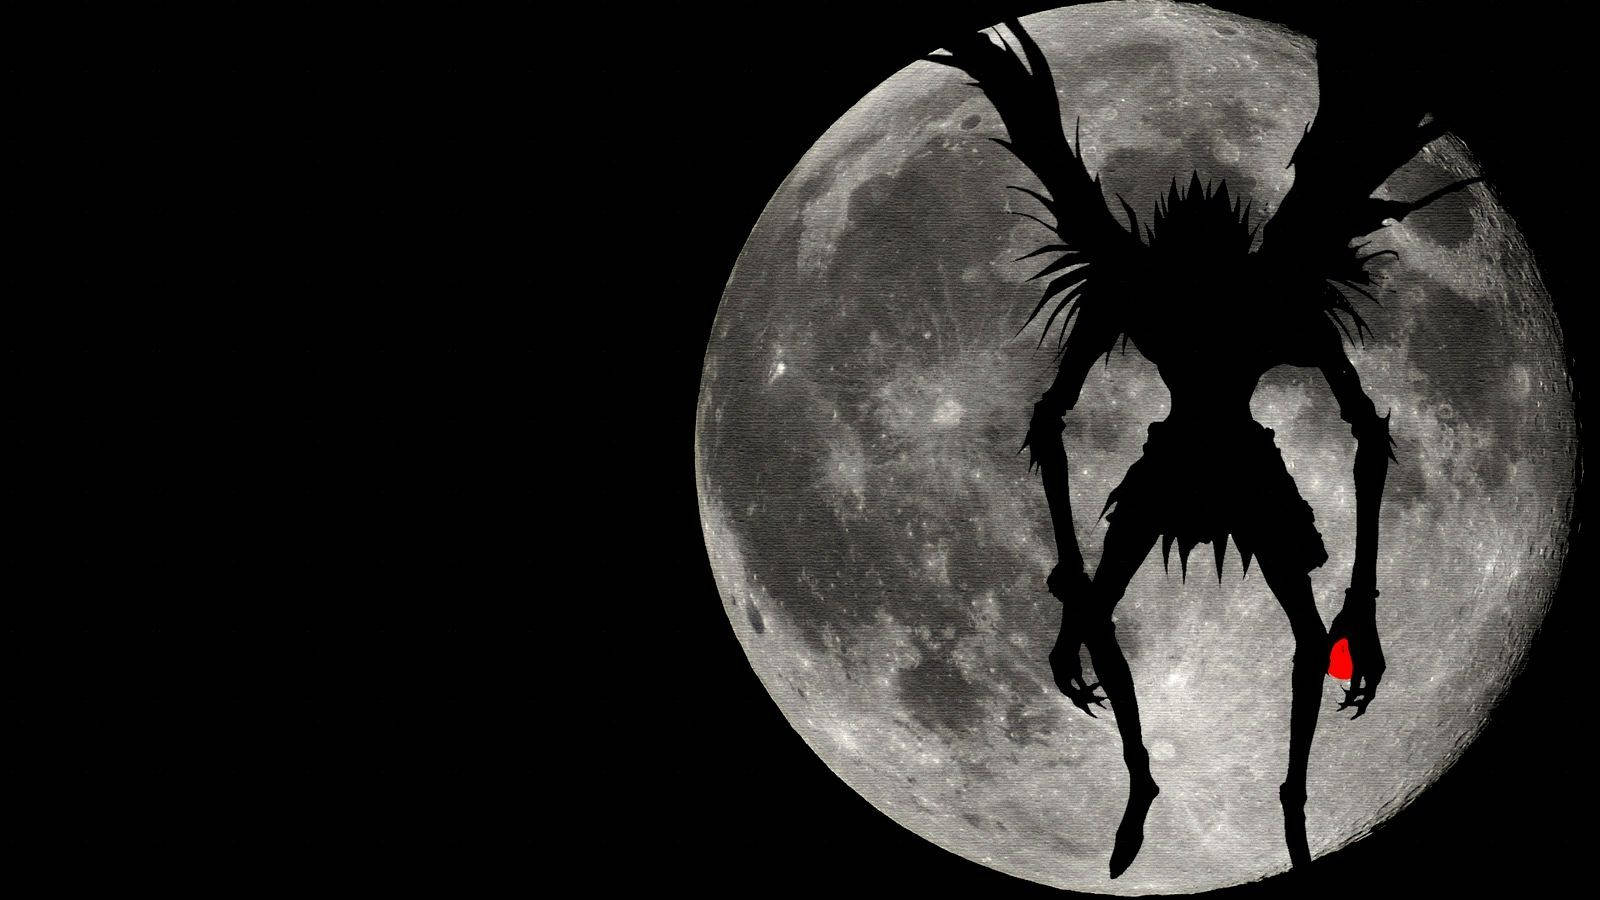 Shinigami Ryuk From The Anime Series, Death Note Background